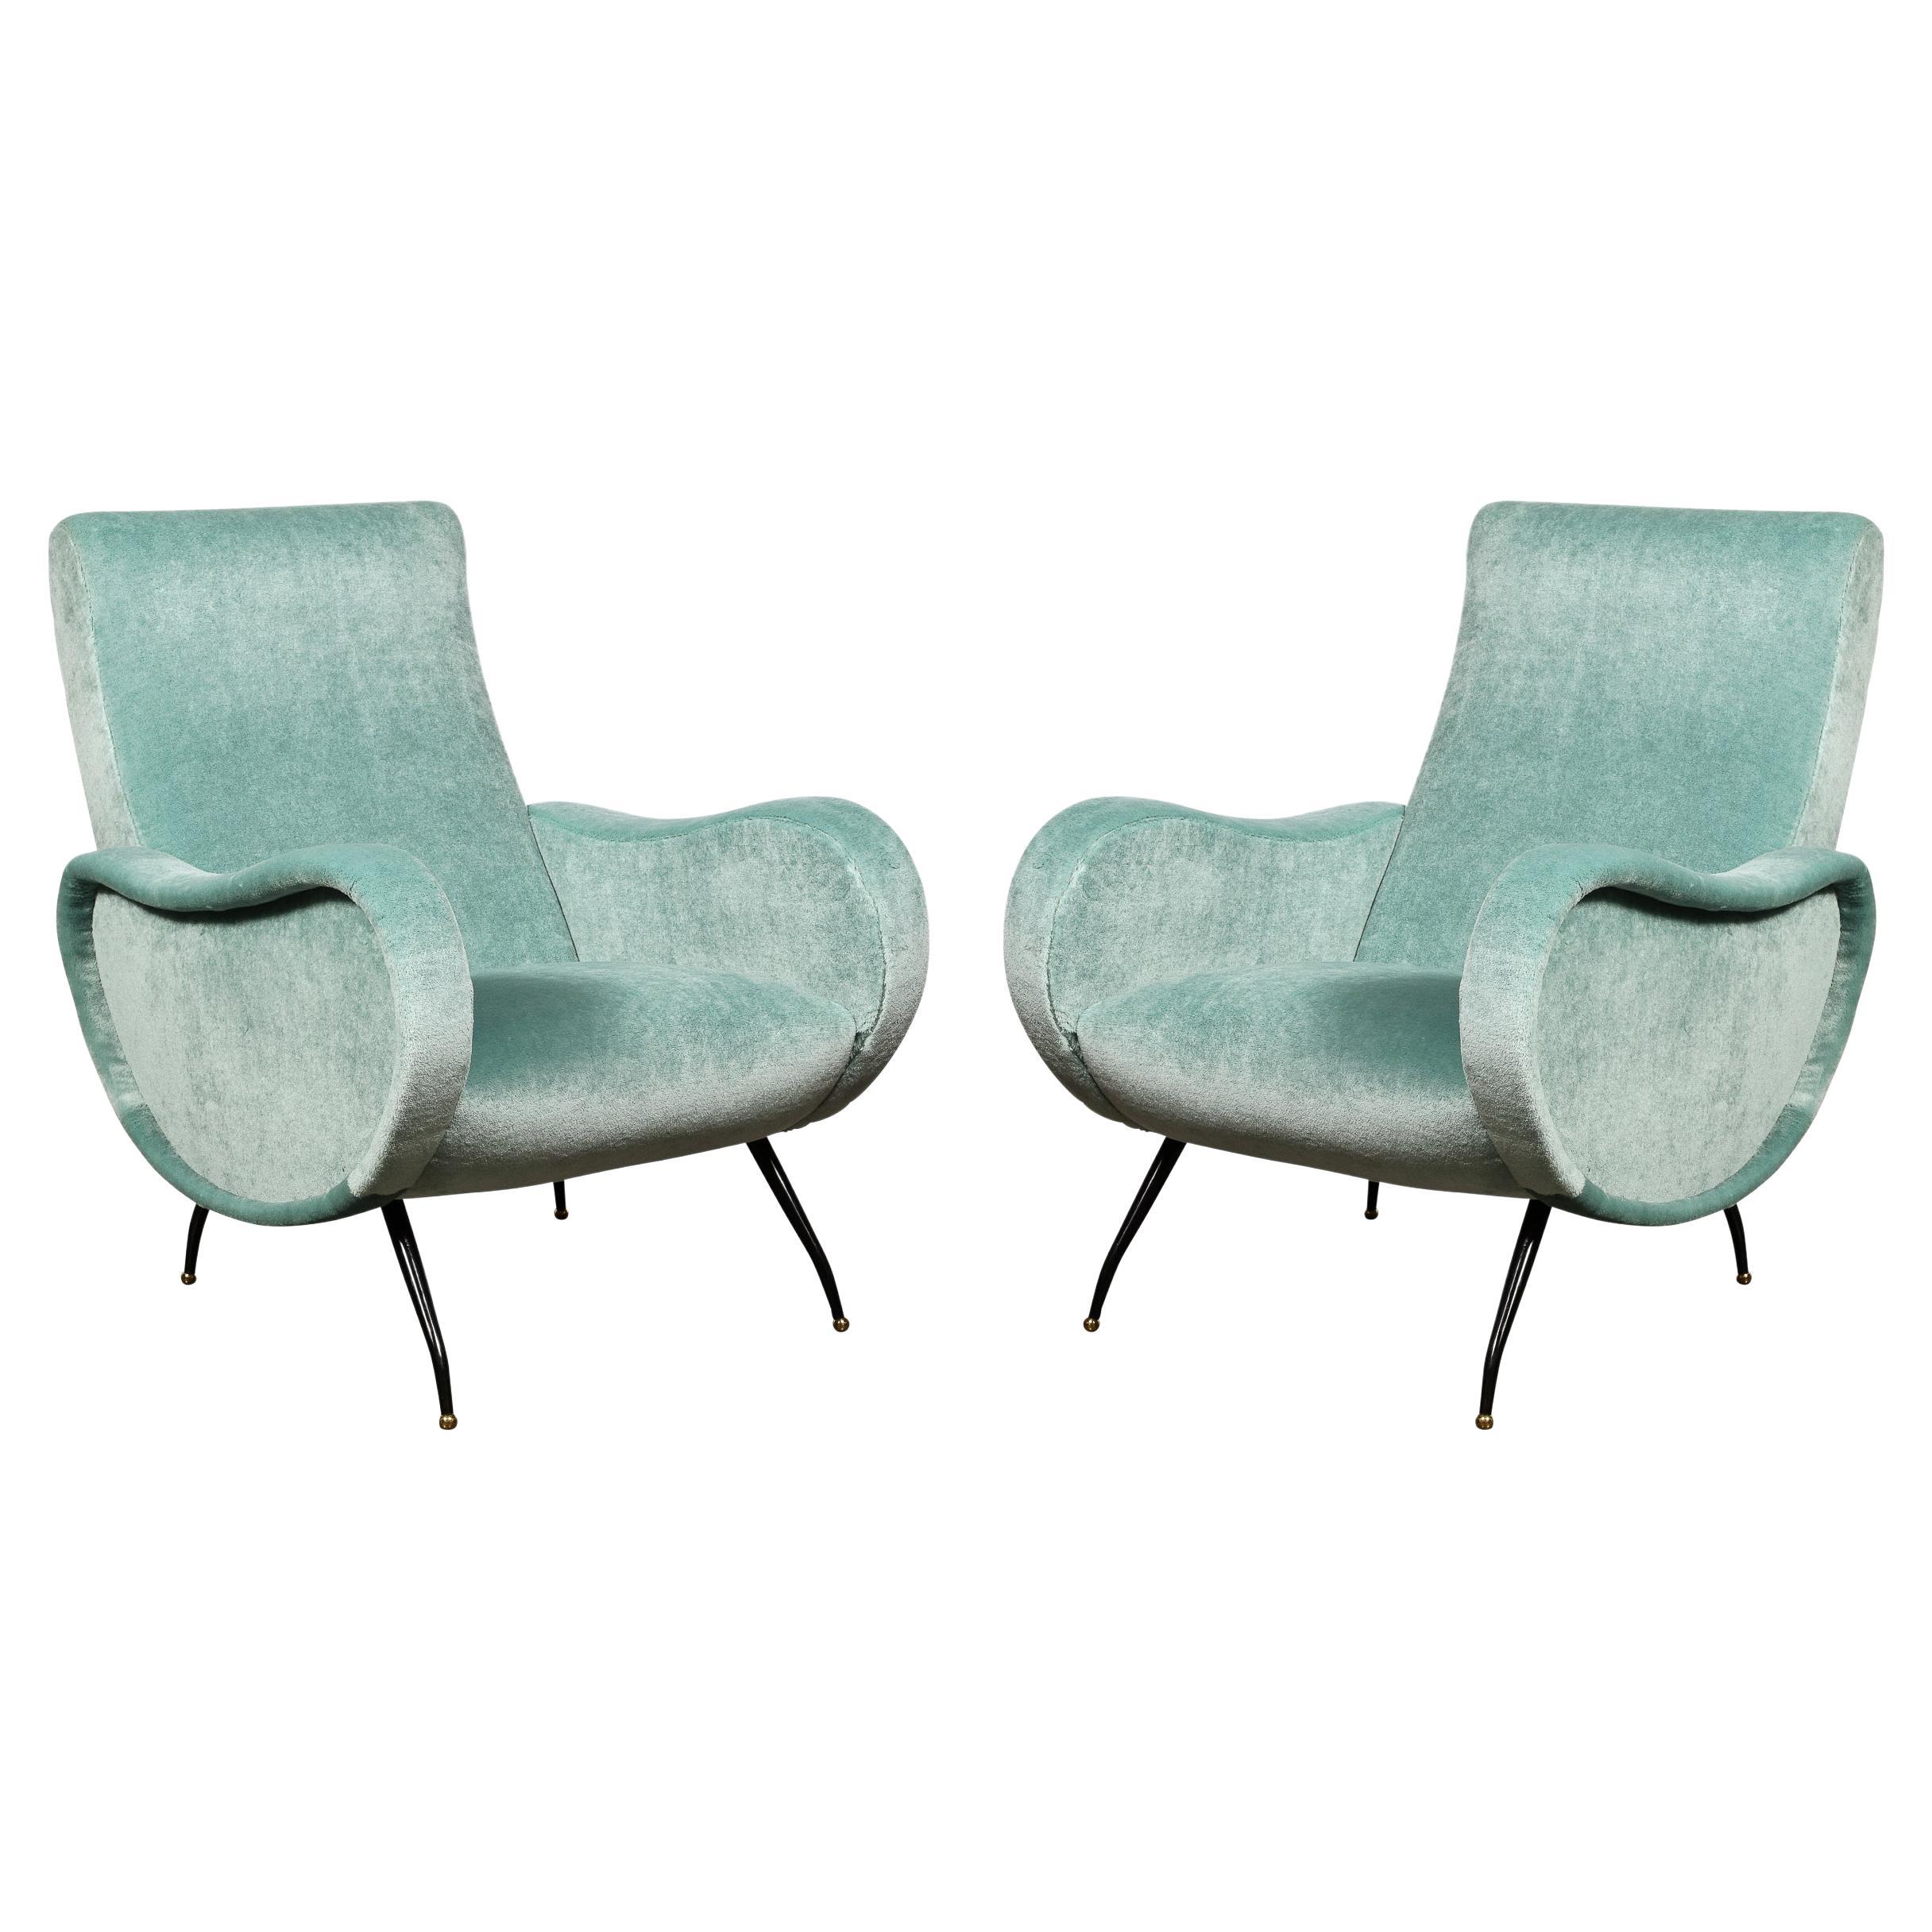 Mid-Century Modern 'Lady Arm Chairs' in Aquamarine Mohair by Marco Zanuso